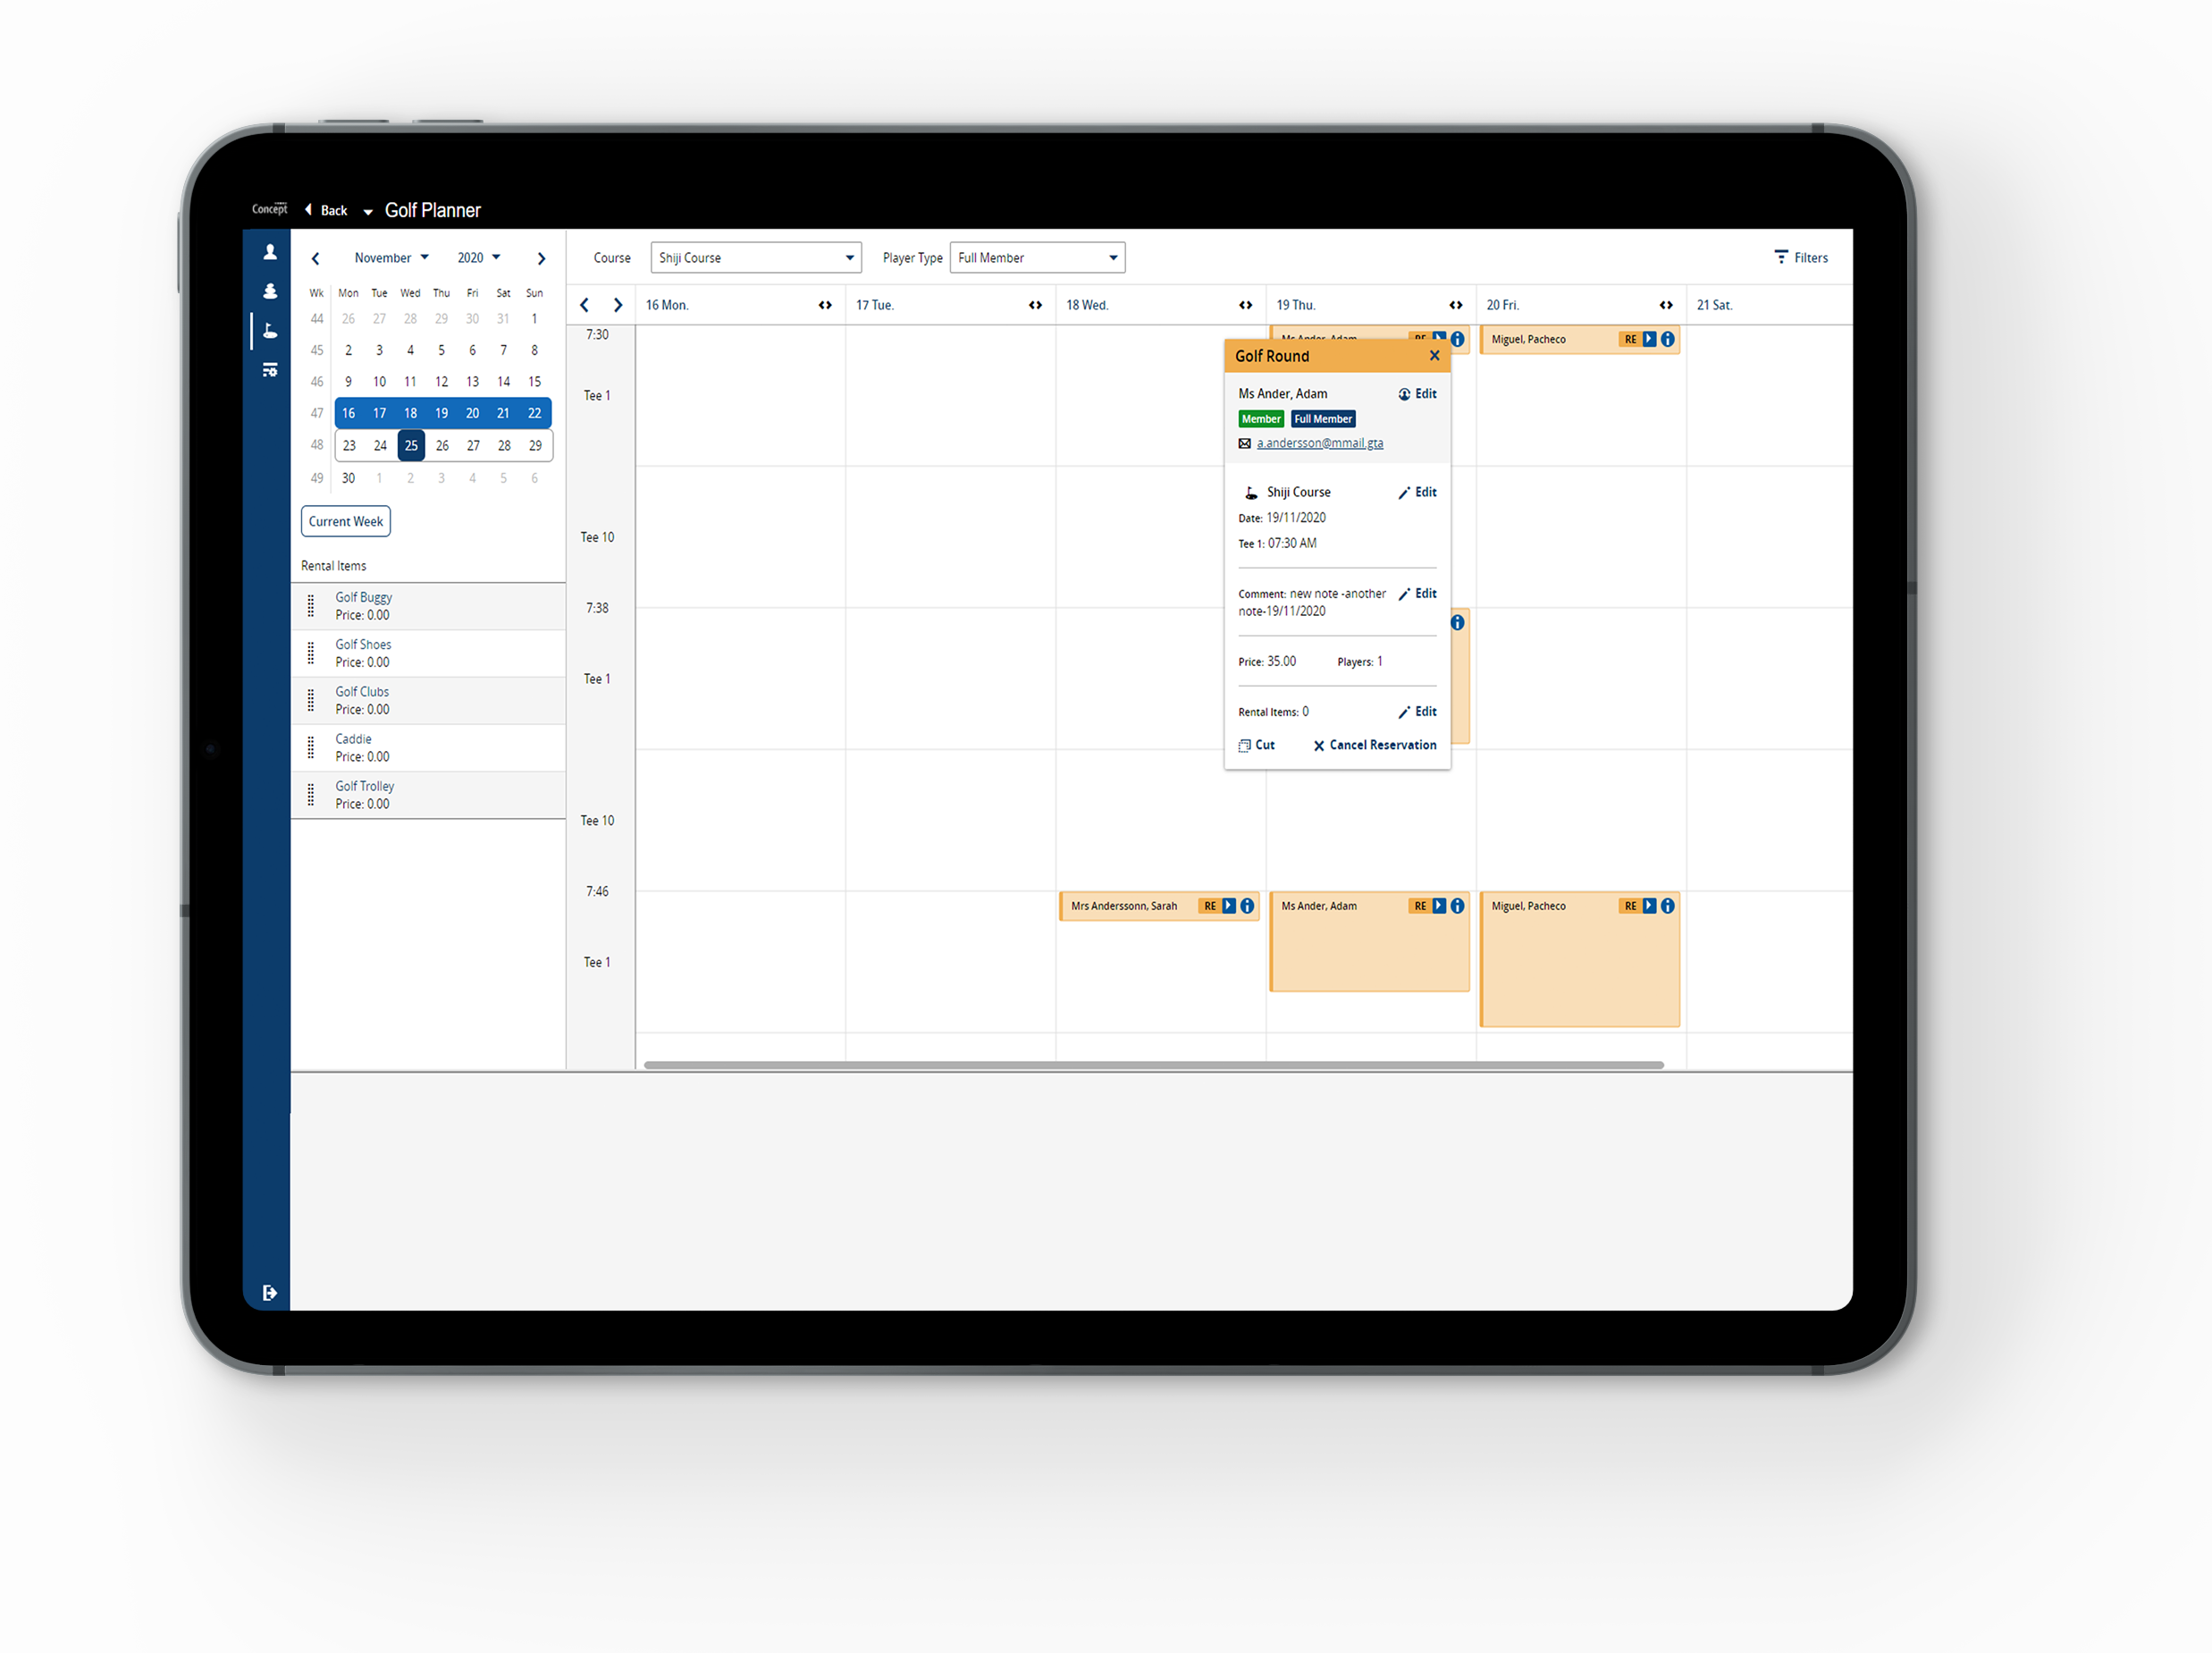 Concept Mobile for Ipad Golf Planner. Concept Mobile for iPad works in conjunction with our Concept Spa & Leisure software to manage spa reservations, staff schedules and guest profiles anywhere within your Spa.